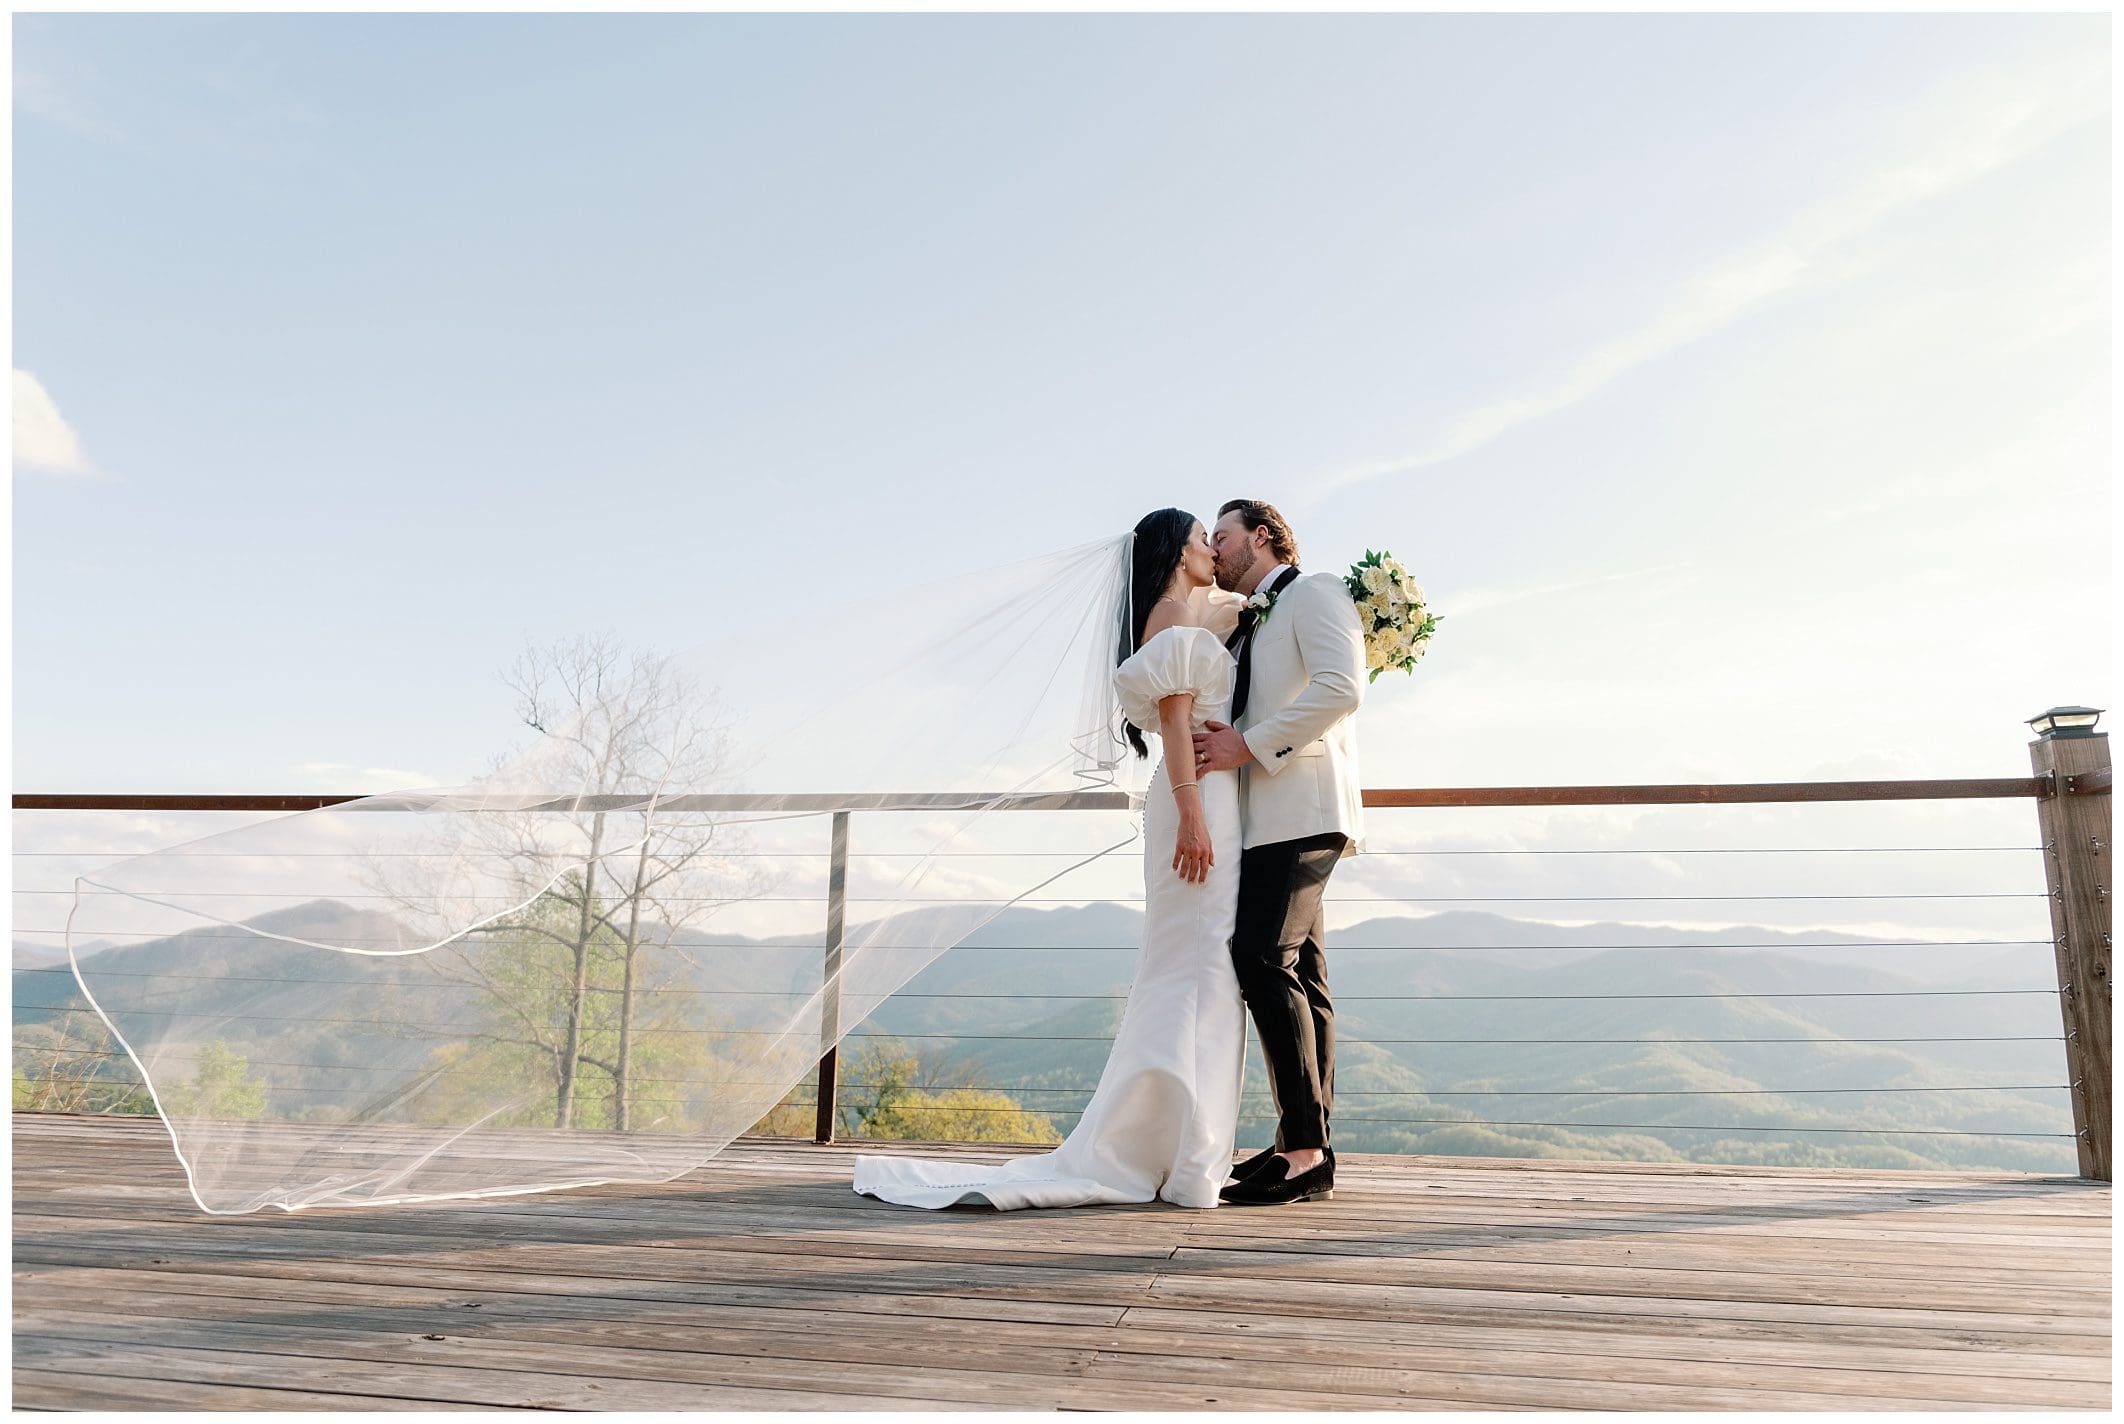 A bride and groom kissing on a deck with a scenic mountain backdrop, the bride's veil flowing in the breeze.